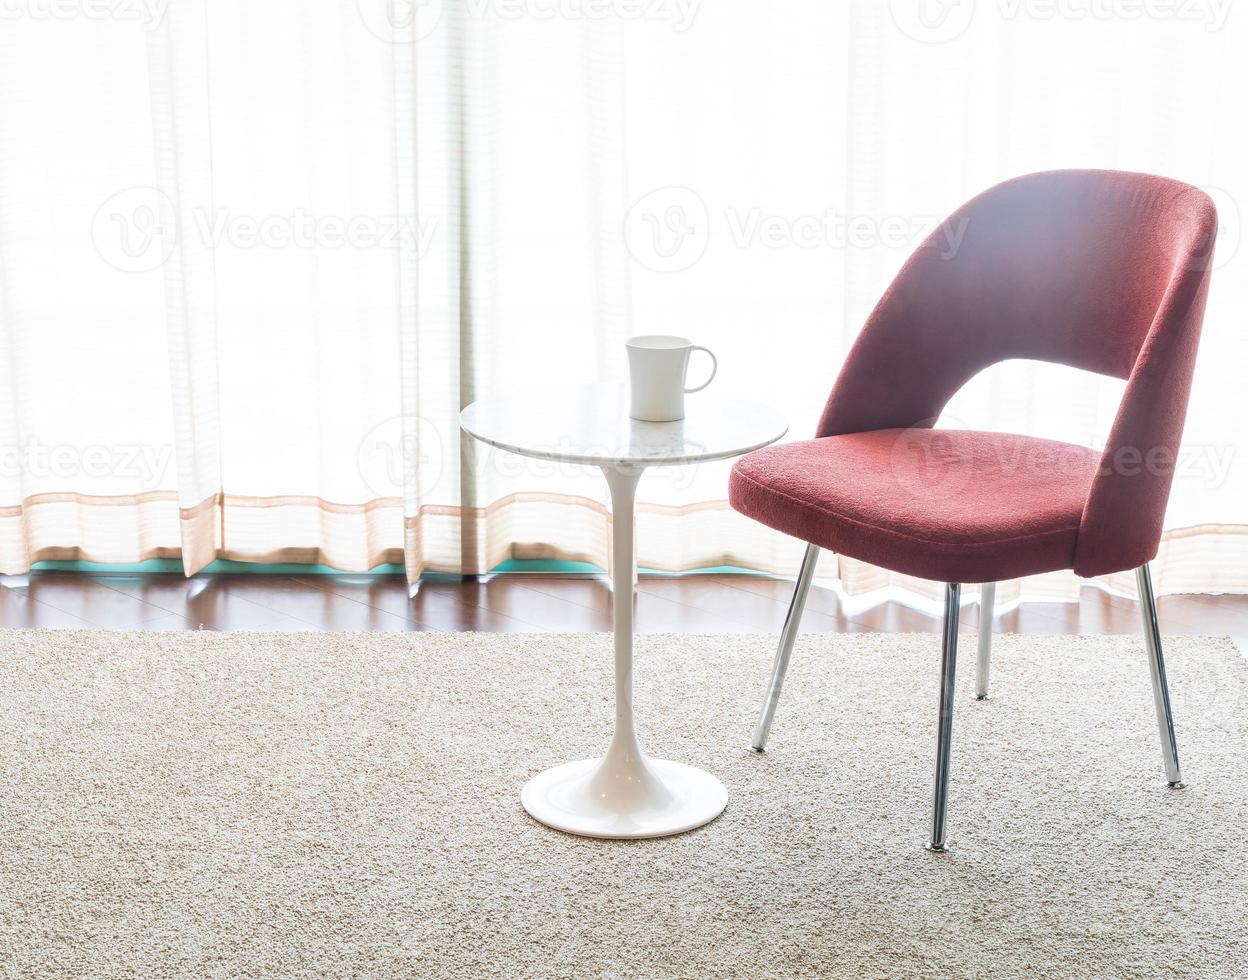 Coffee cup with beautiful luxury chair and table decoration in living room interior for background - Vintage Filter photo